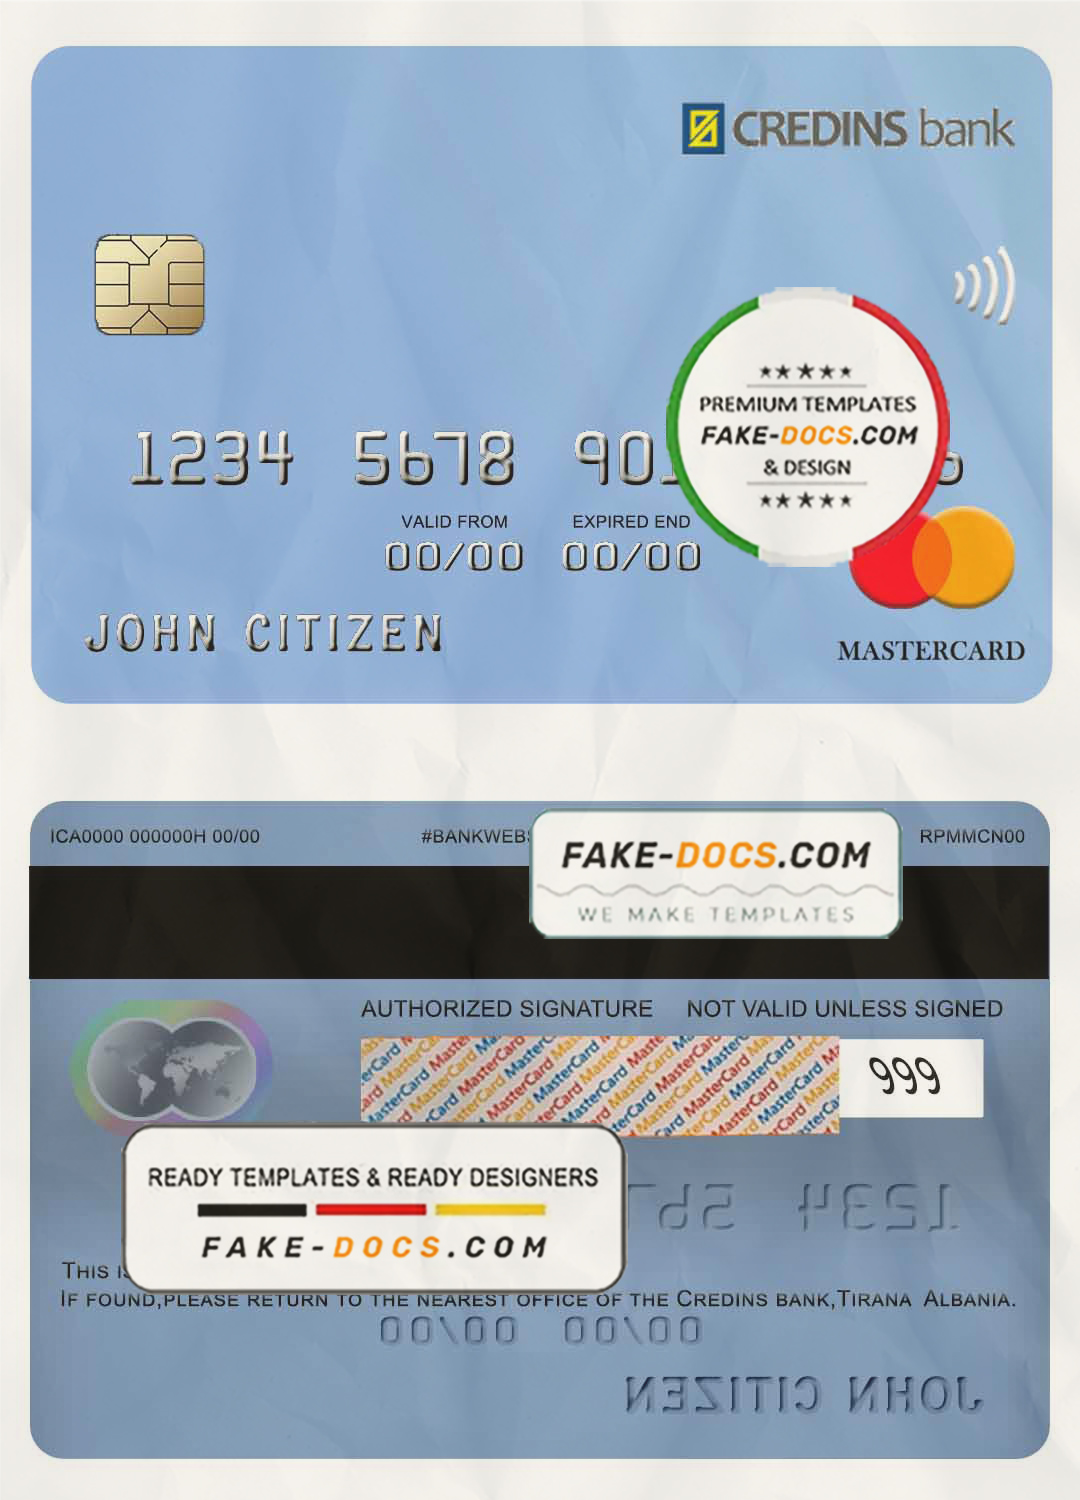 Albania Credins bank mastercard template in PSD format, fully editable scan